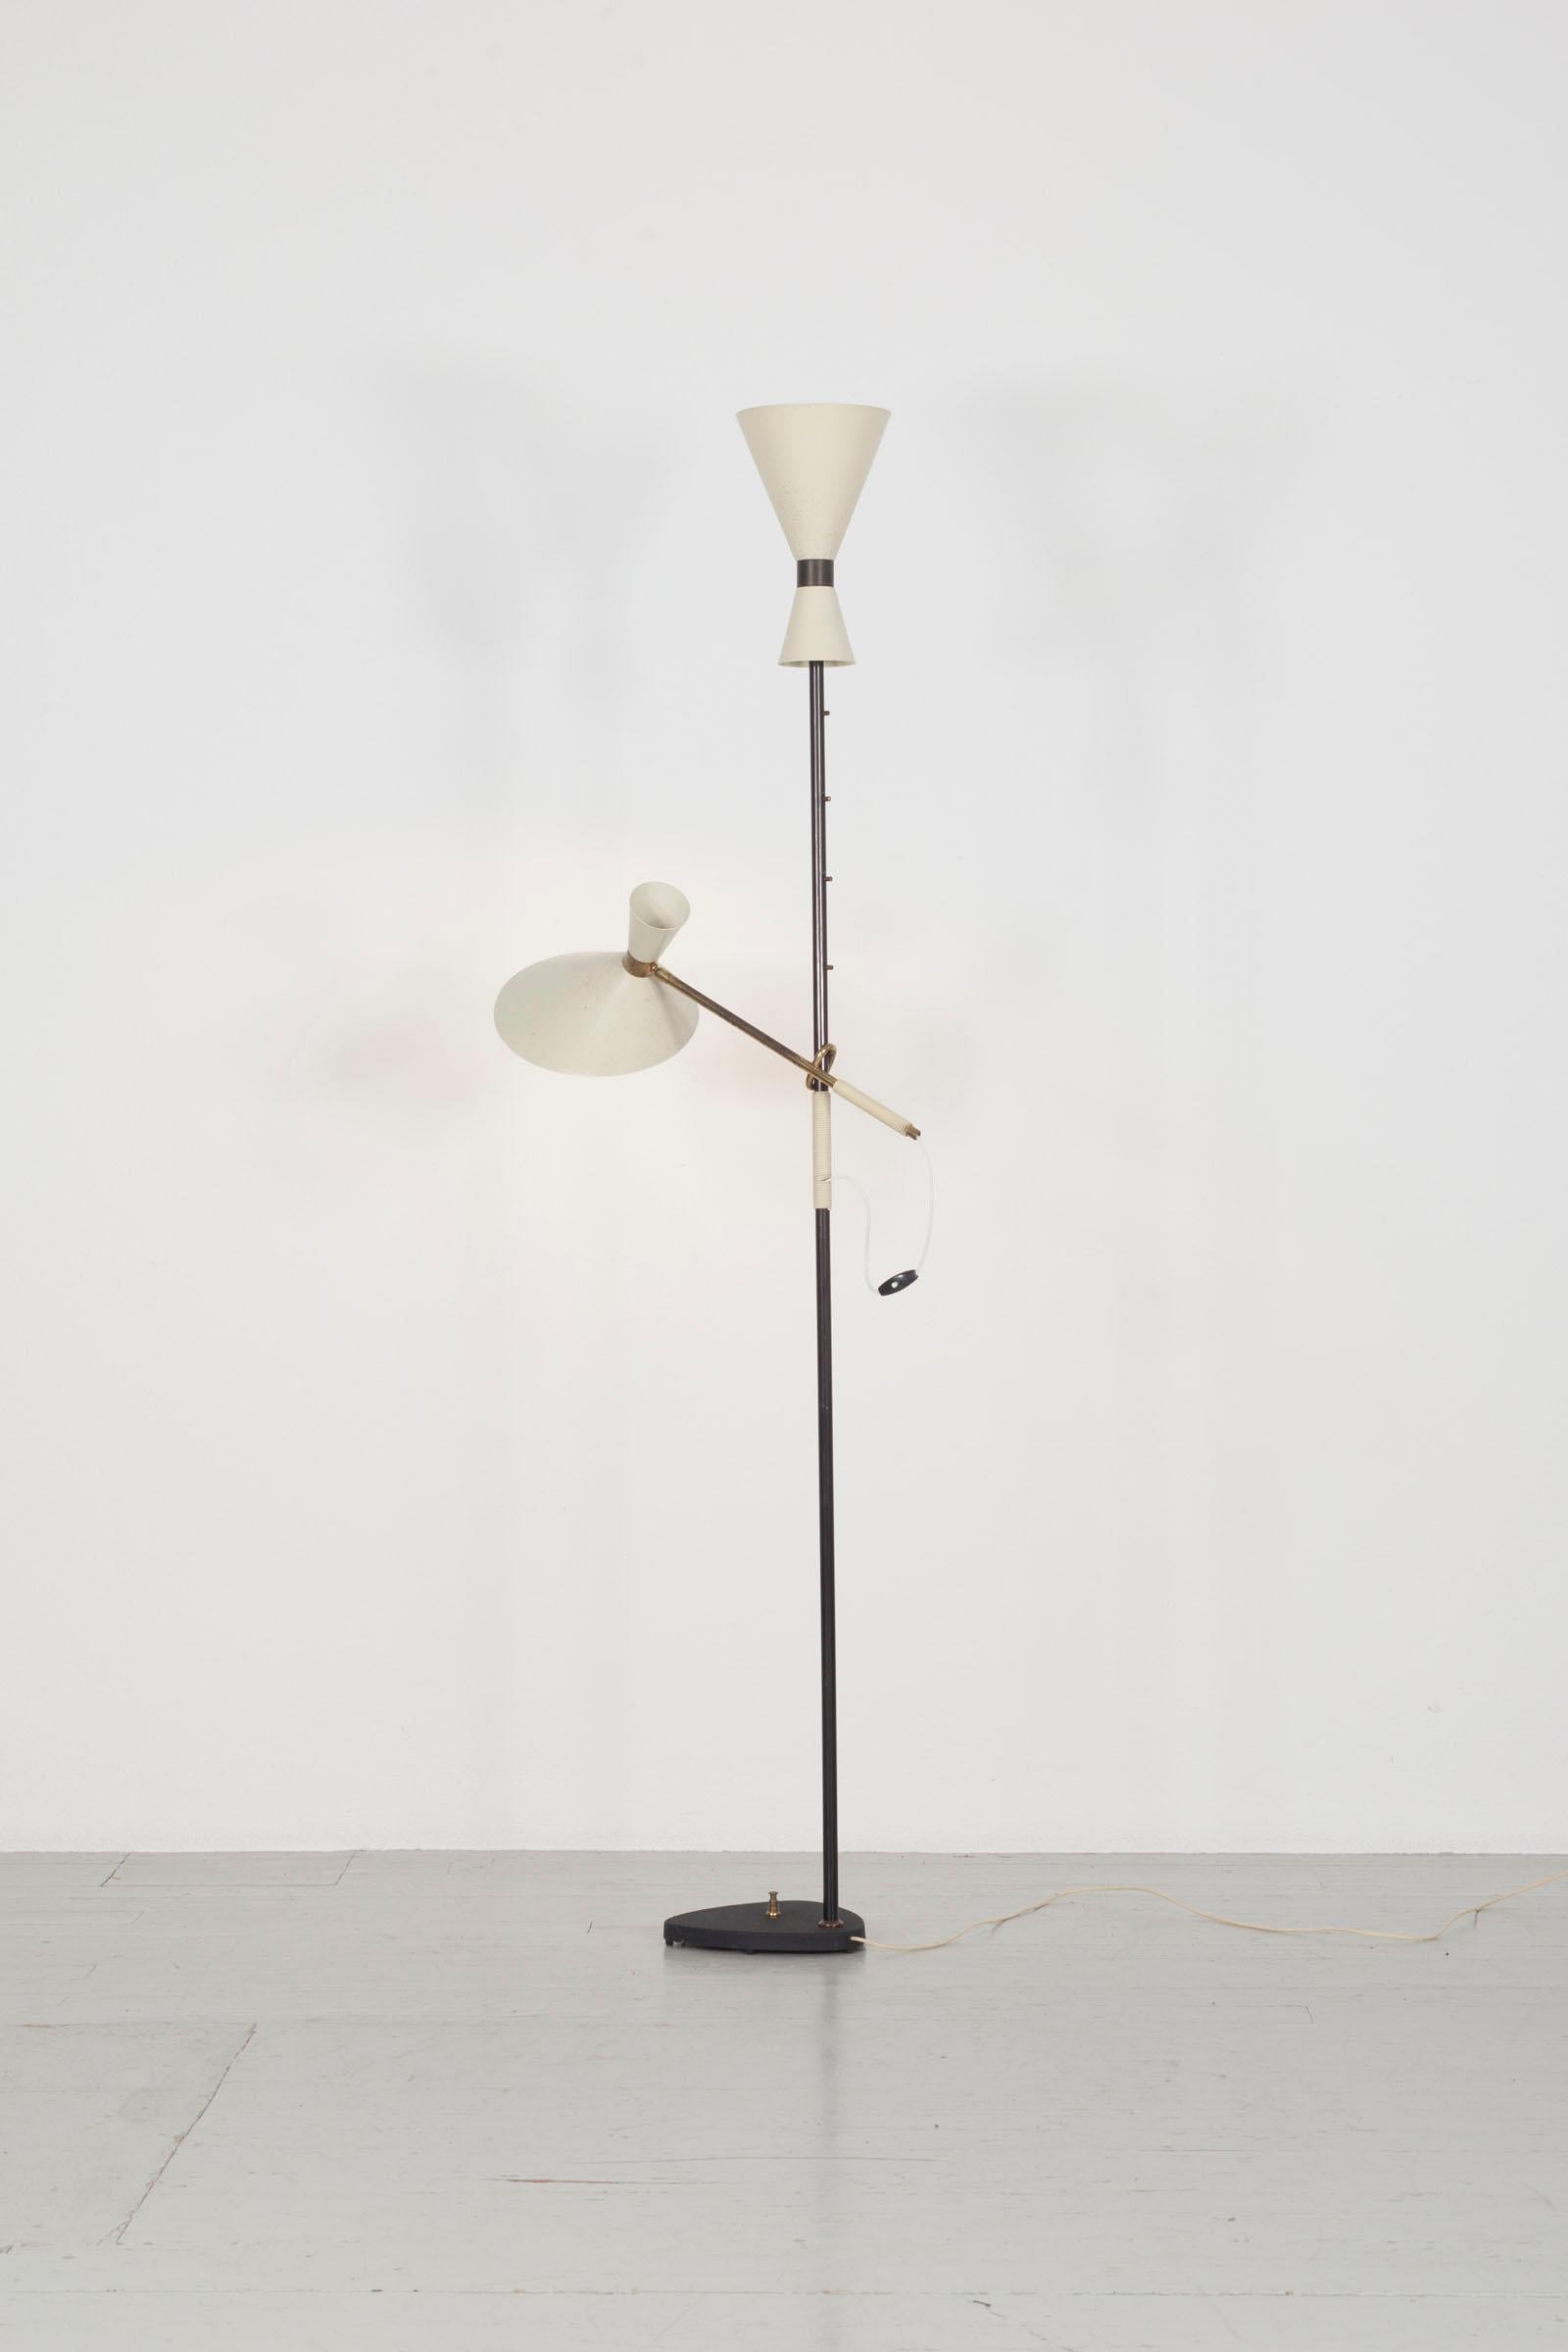 Floor Lamp - Design by J.T. Kalmar, manufactured by Kalmar, Vienna, 1950s. This lamp has an adjustable, lacquered metal shade and uplight. 